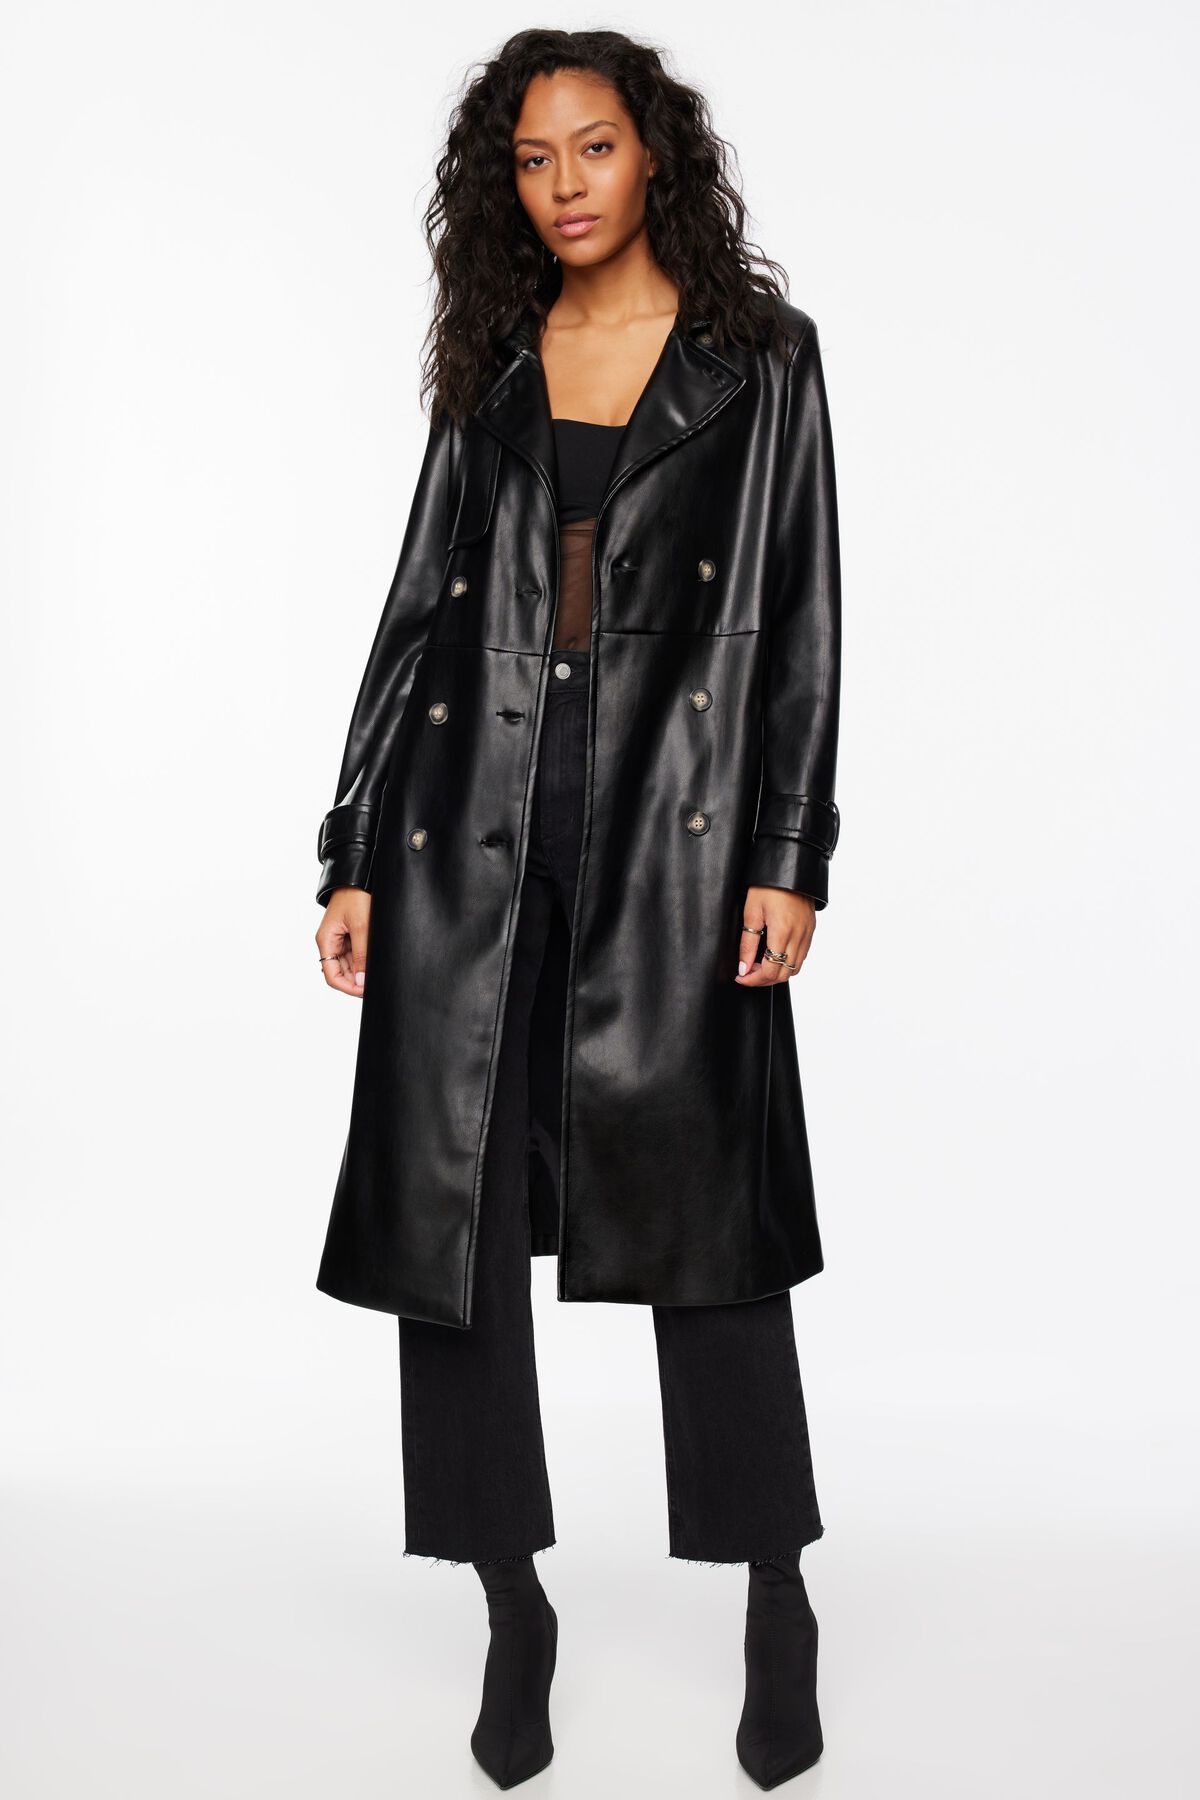 Dynamite Maxi Faux Leather Trench Coat - 10008220006V